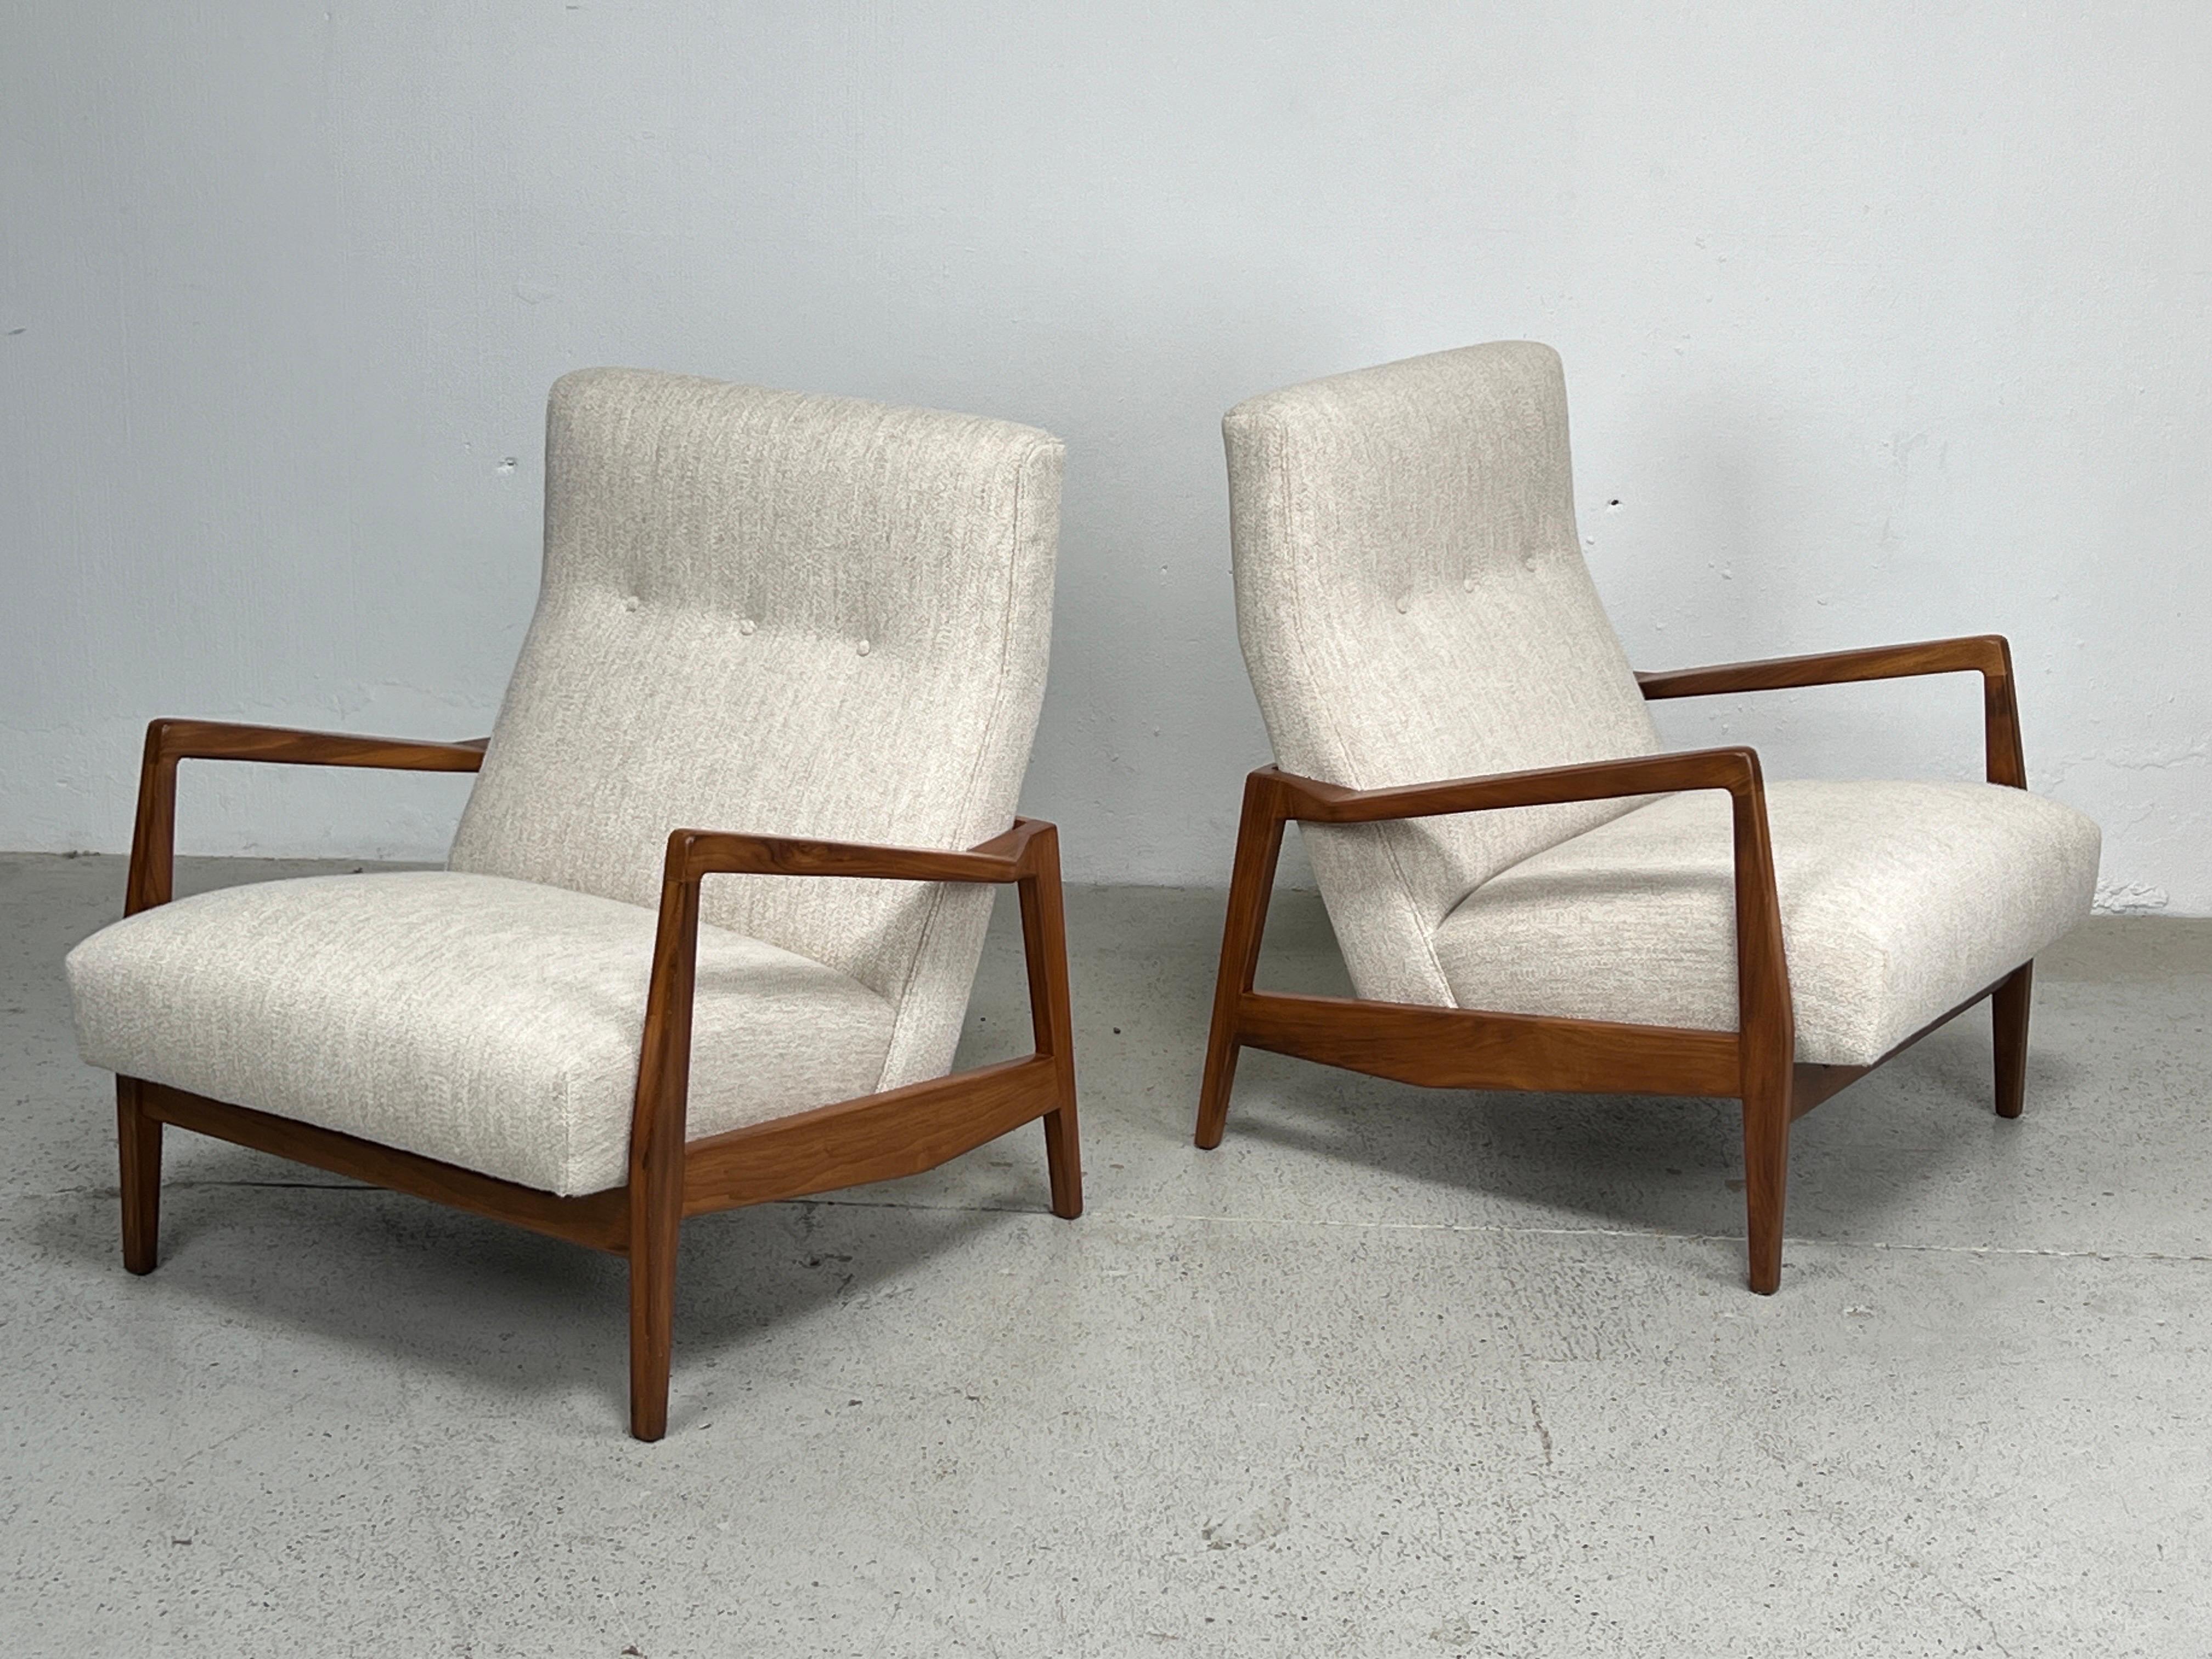 A pair of solid walnut lounge chairs designed by Jens Risom. Fully restored and reupholstered in Holly Hunt fabric. 